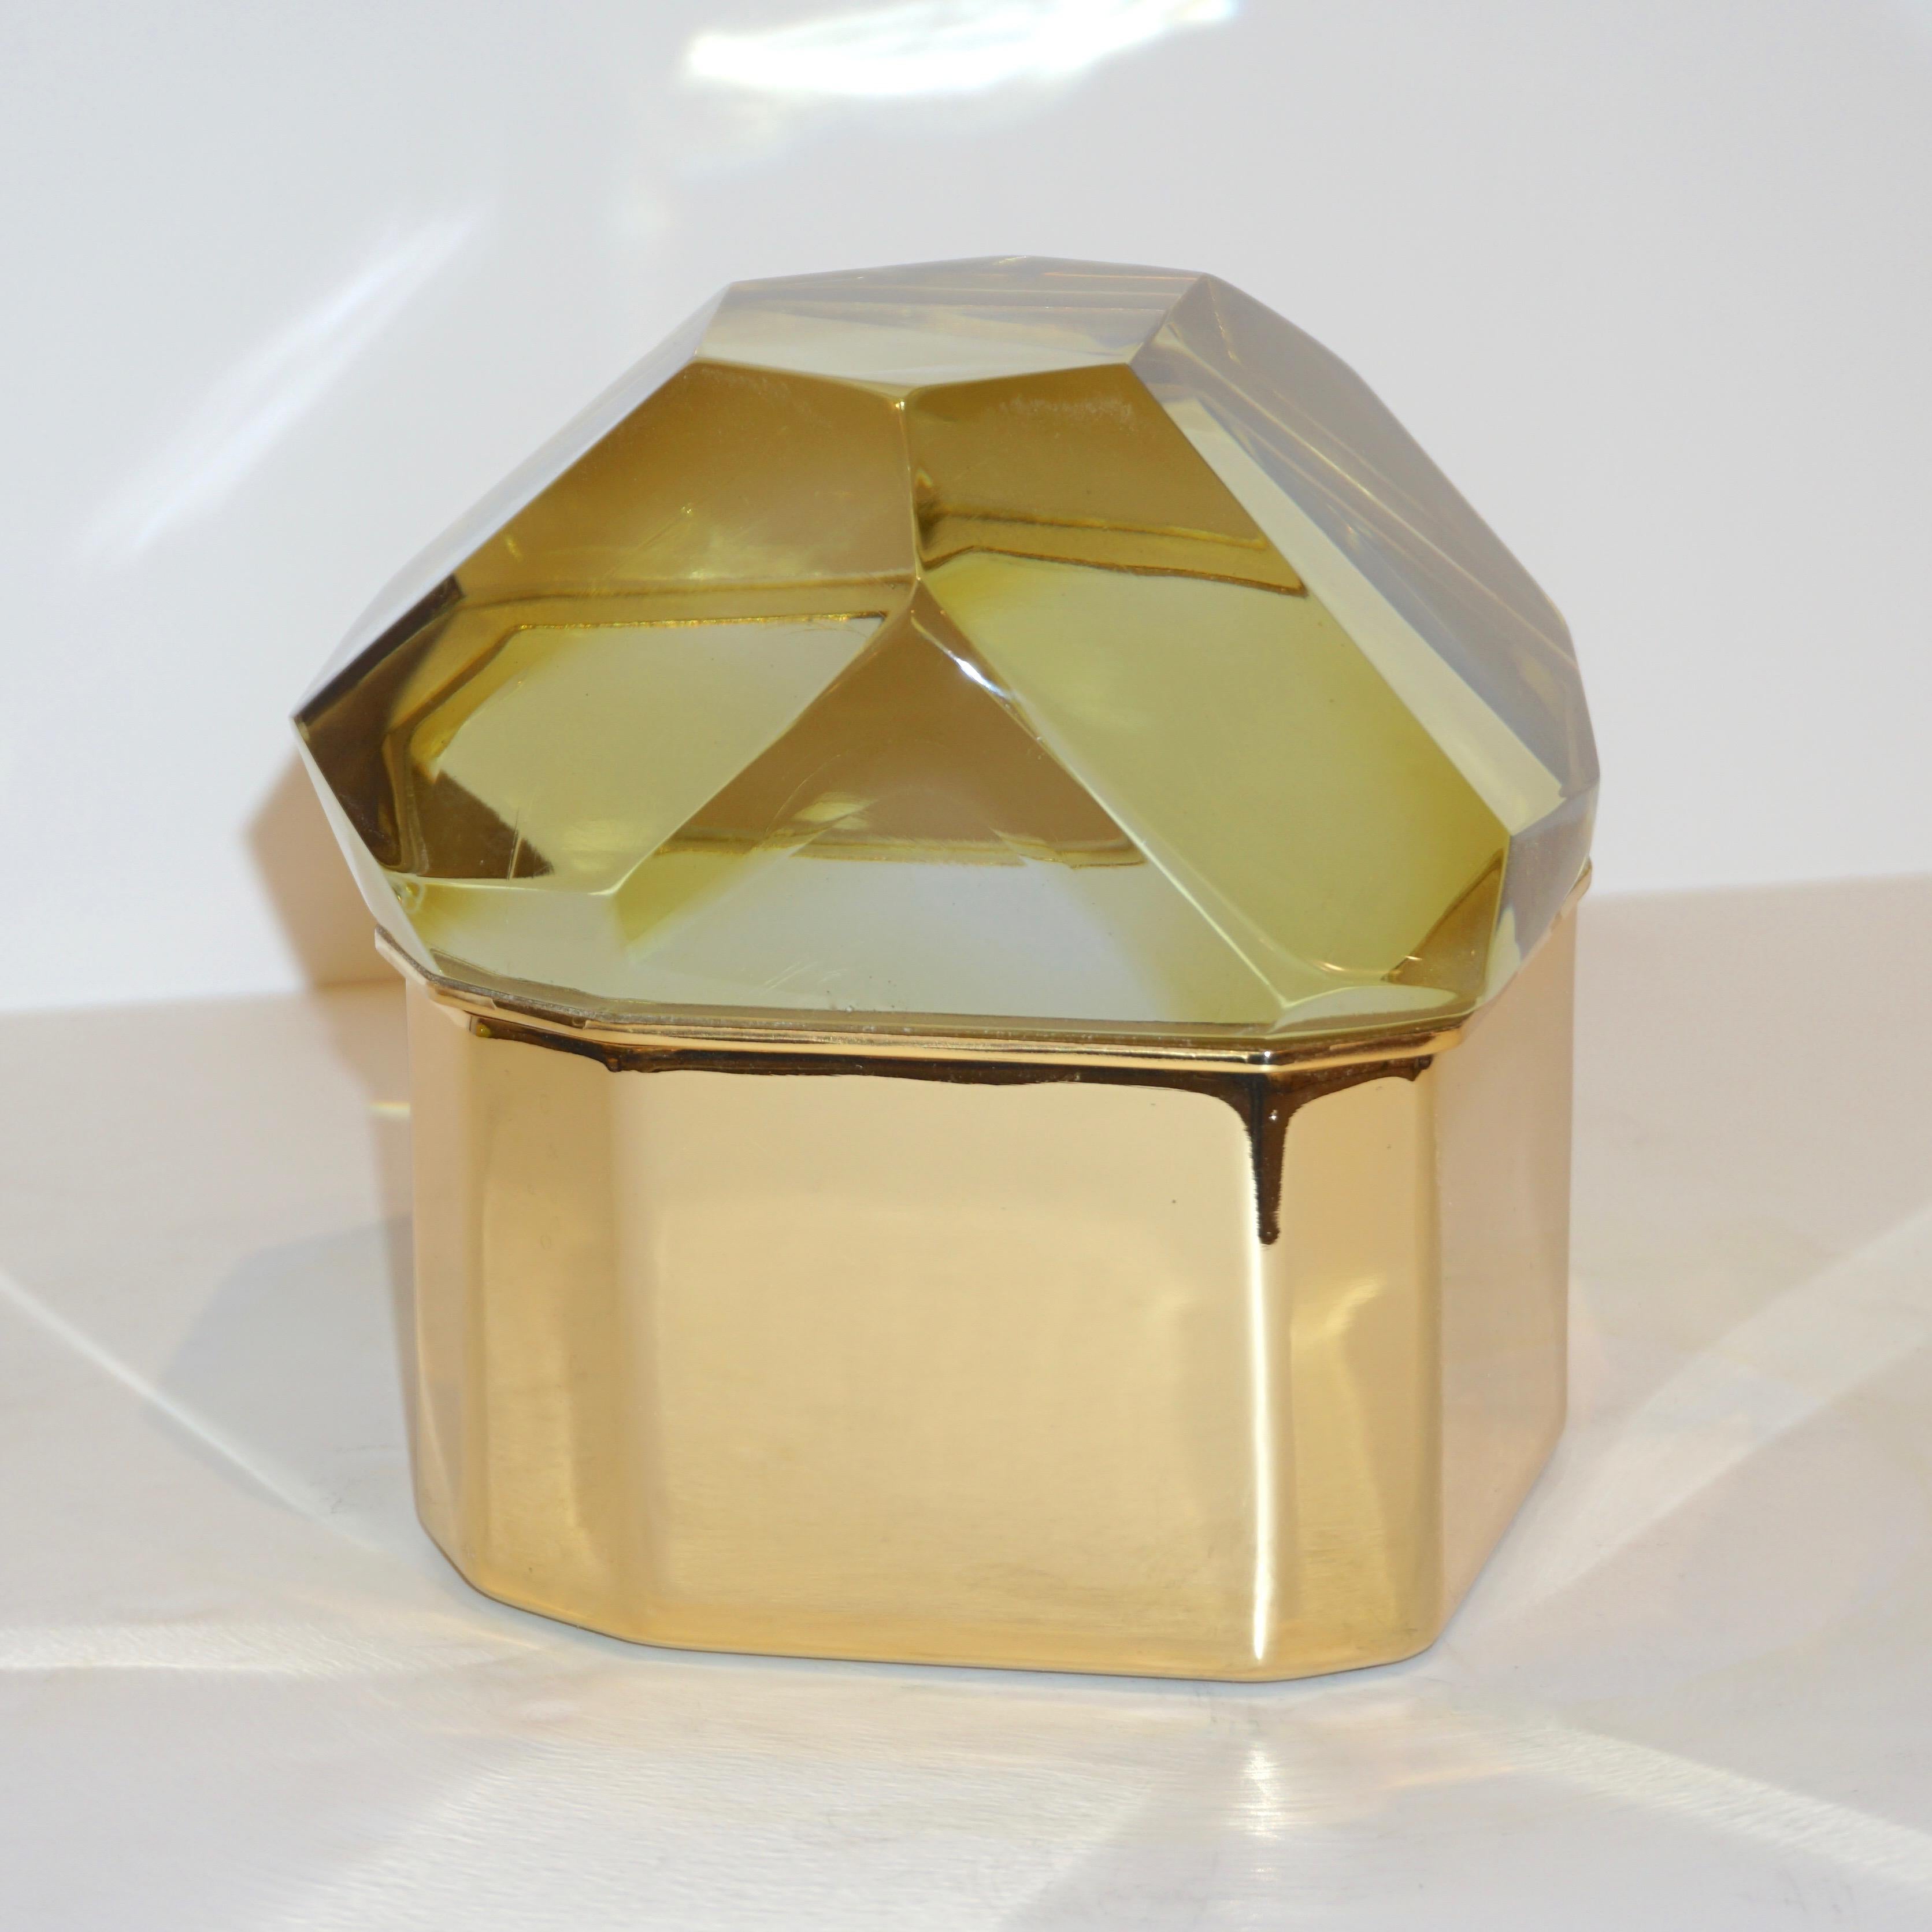 Italian contemporary organic glamorous casket, entirely handcrafted, by Toso Vetri d'Arte (Murano) with a freeform handmade geometric brass case, handcut like a diamond, in a sophisticated gold yellow blown rock Murano glass, transparent depending